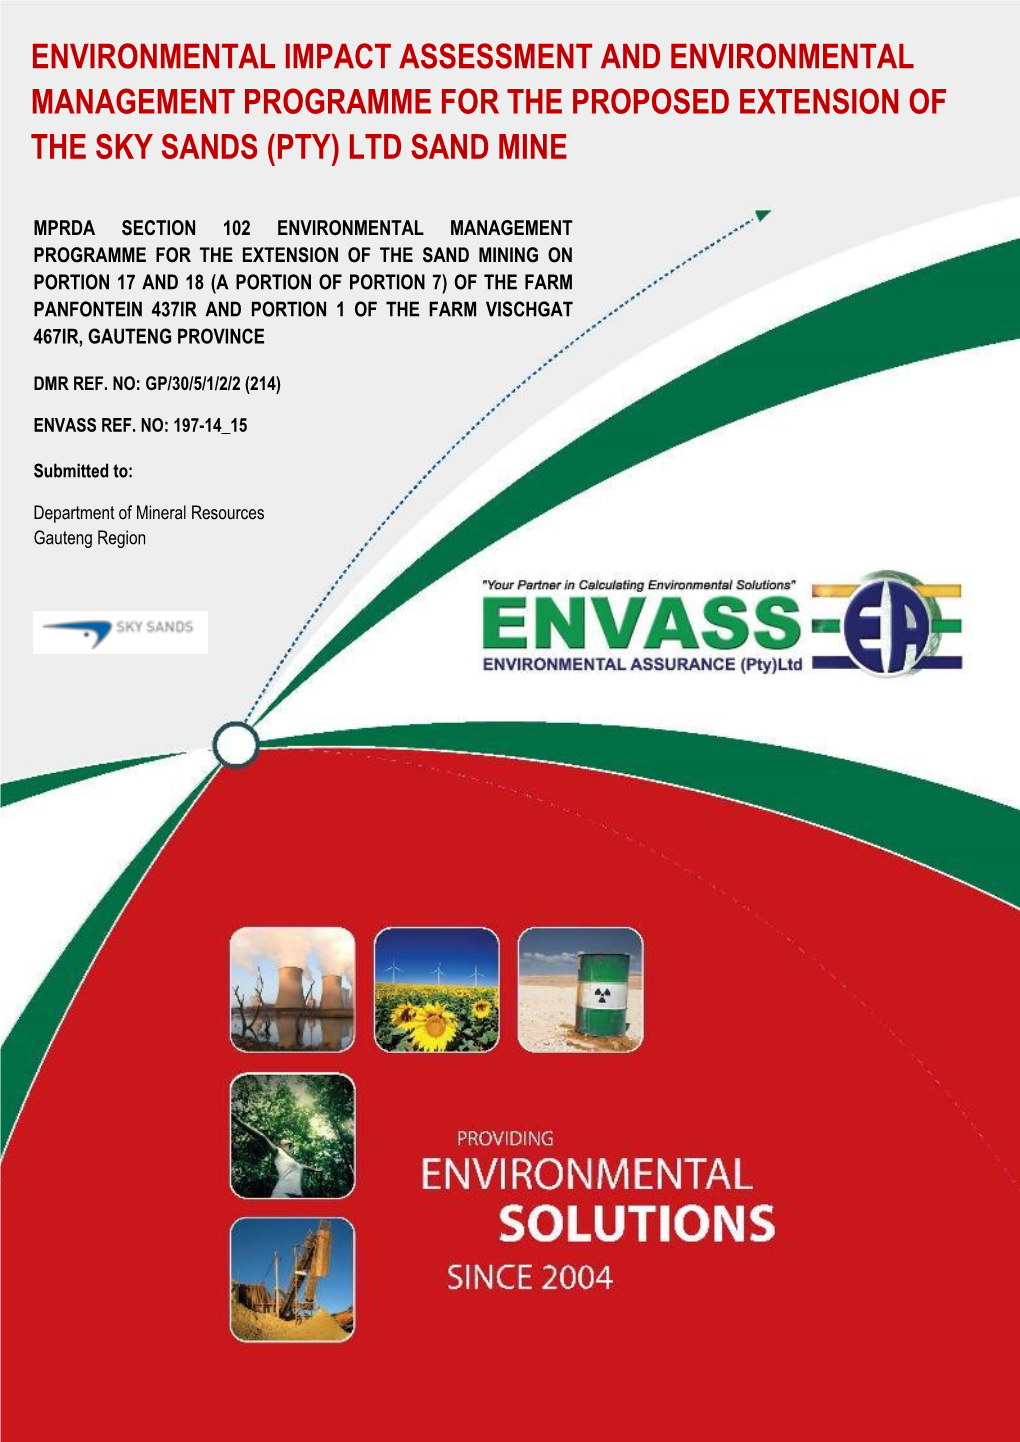 Environmental Impact Assessment and Environmental Management Programme for the Proposed Extension of the Sky Sands (Pty) Ltd Sand Mine